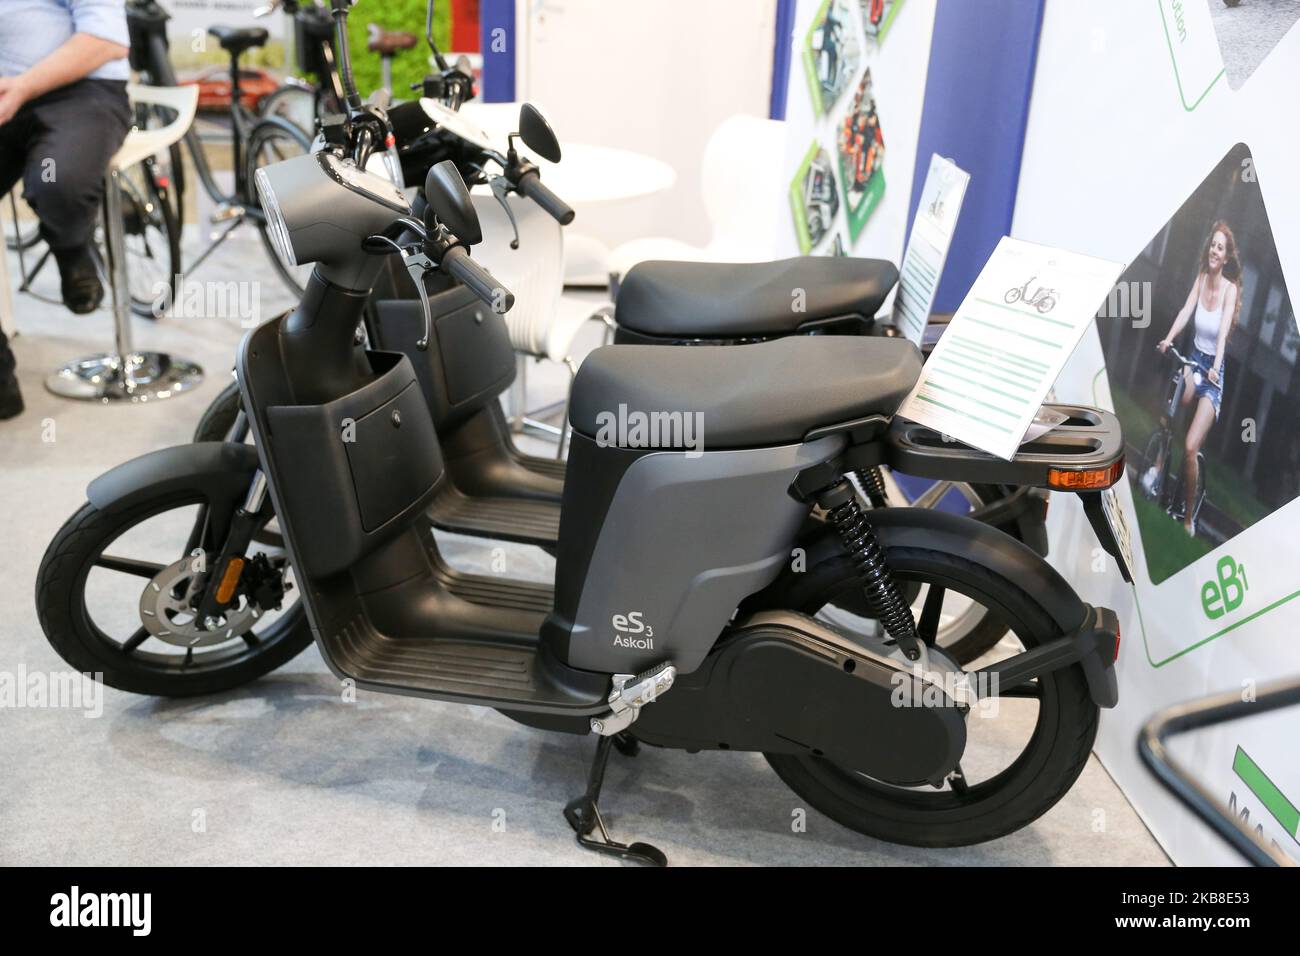 The Italian manufacturer Askoll exhibits an electric scooter eS3 at the Autonomy and Urban Mobility show, in Paris on October 16, 2019. (Photo by Michel Stoupak/NurPhoto) Stock Photo